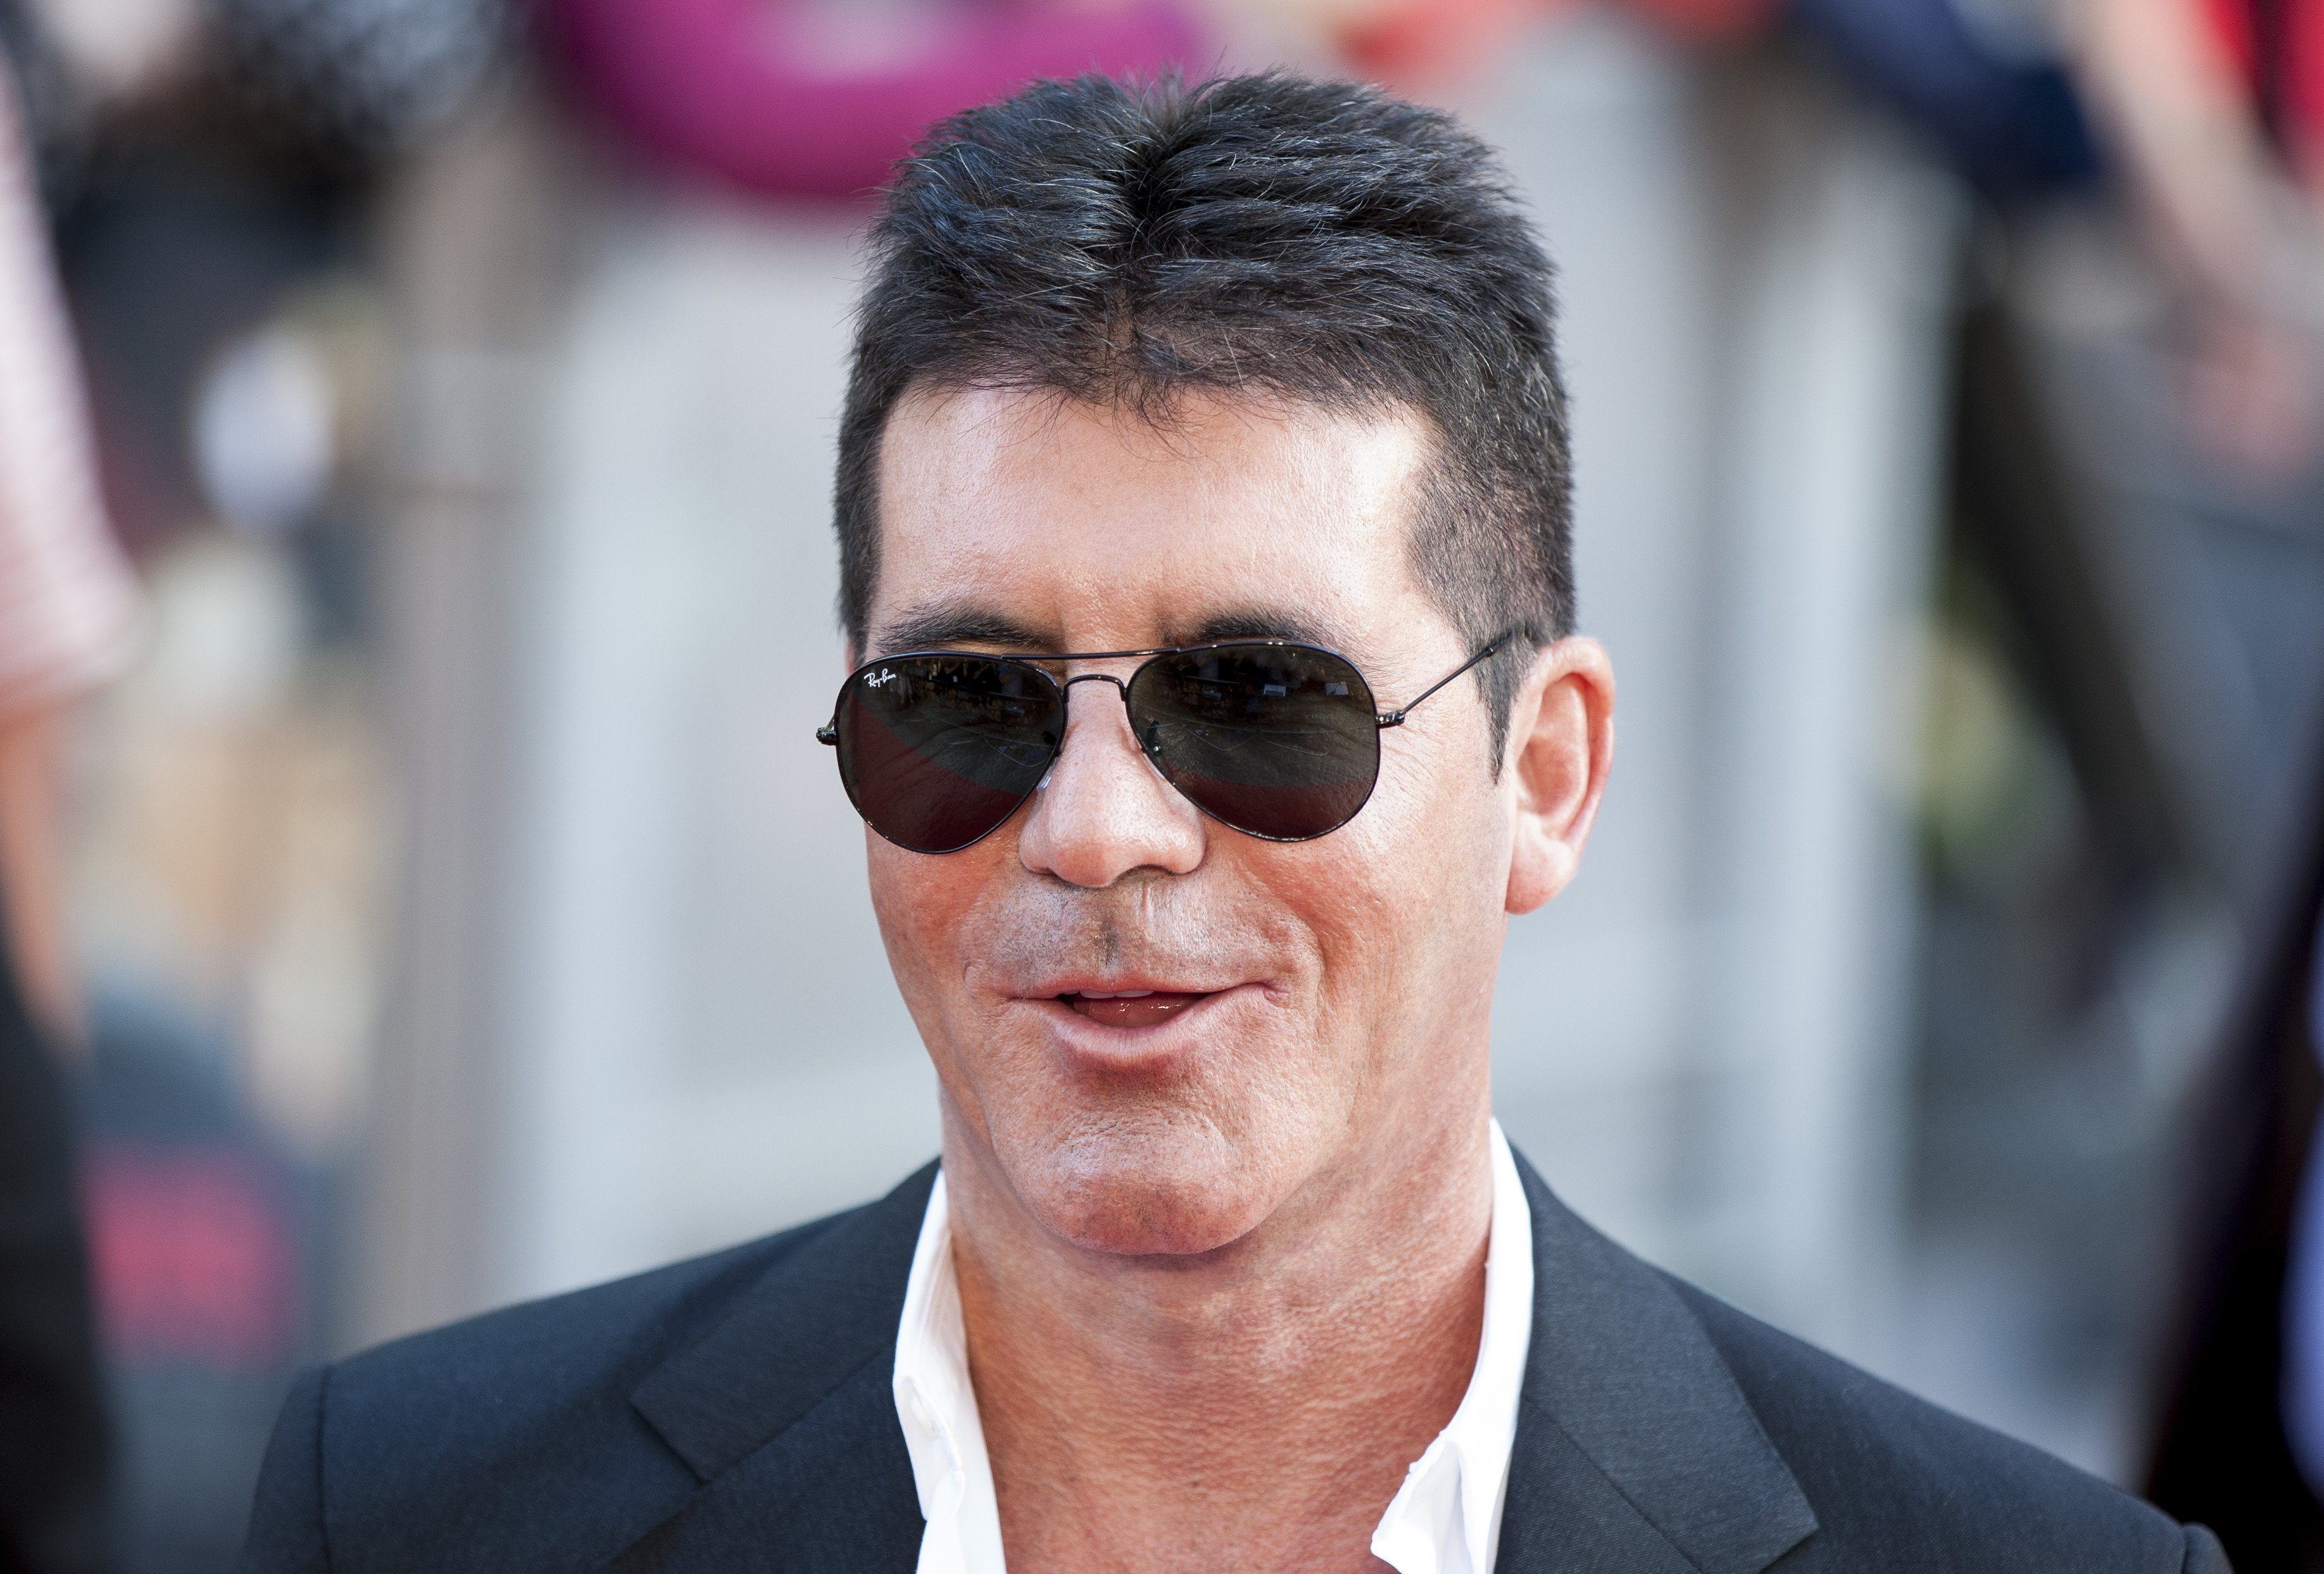 Simon Cowell. I Image: Getty Images.